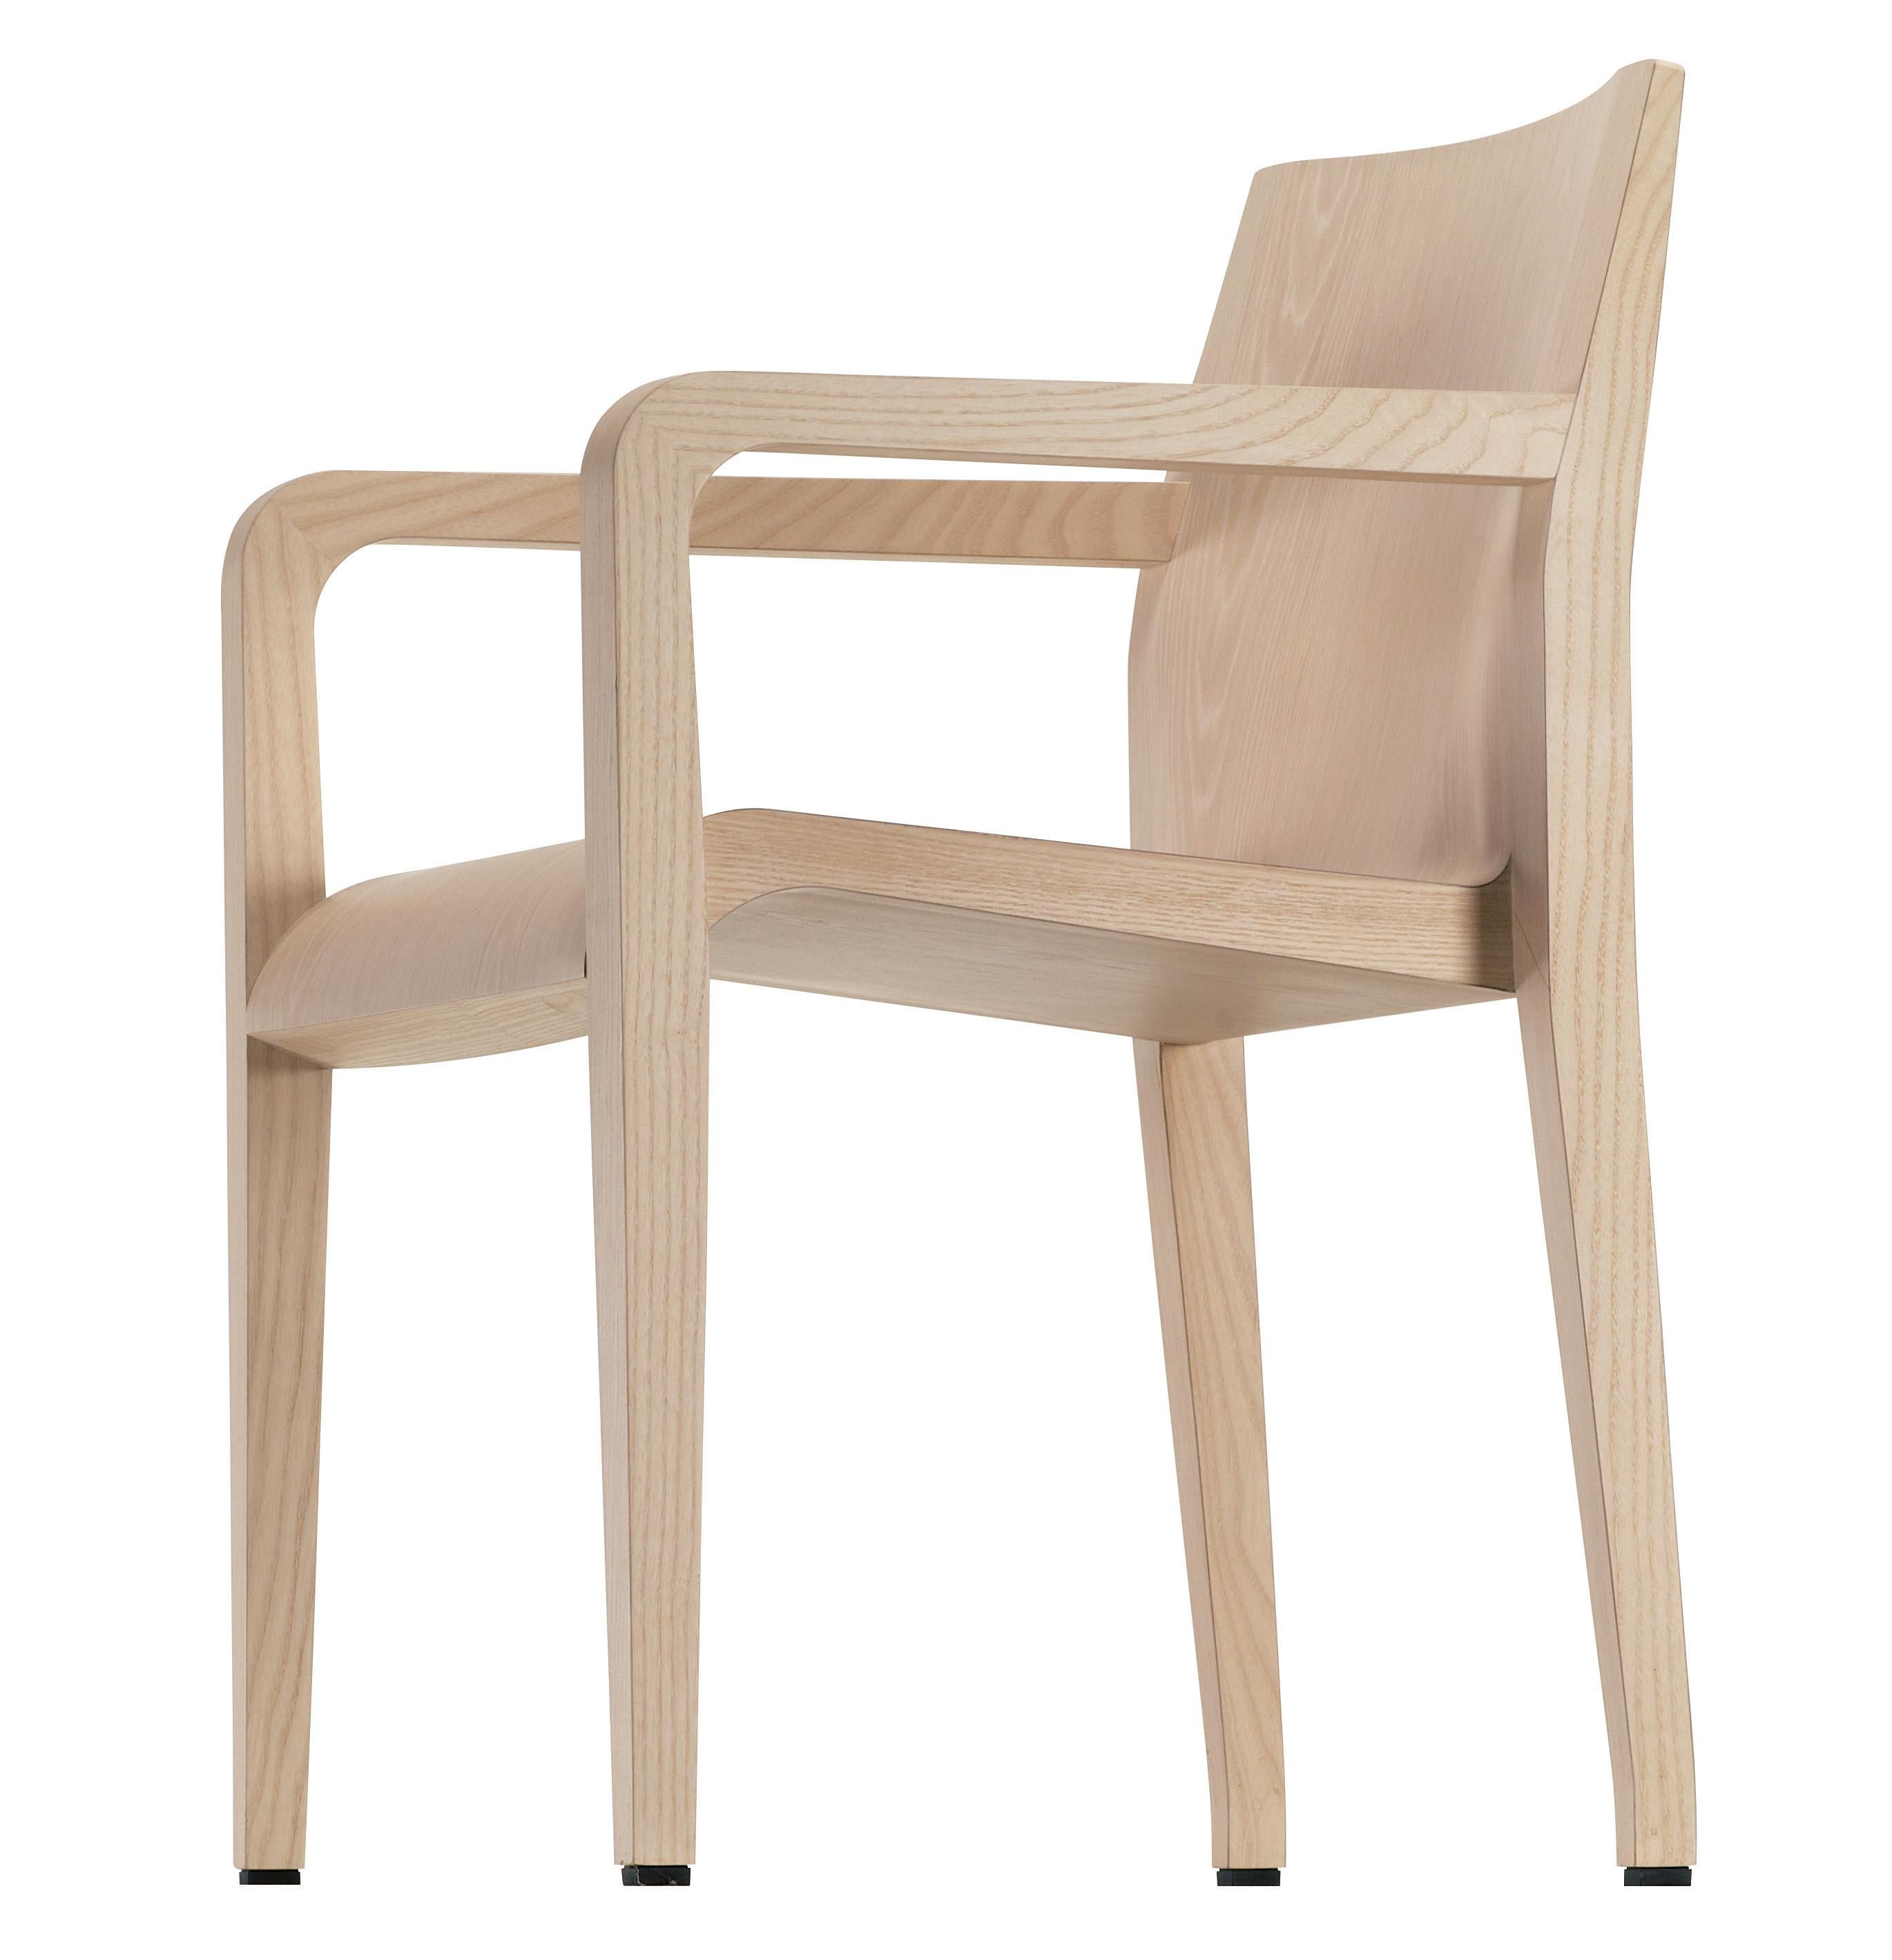 Alias 304 Laleggera Armrest Chair in Whitened Oak Wood by Riccardo Blumer

Chair with arms with structure in solid maple or ash. Maple veneer or oak veneer.Internal support in injected polyurethane foam. Finish in transparent laquage or in colored